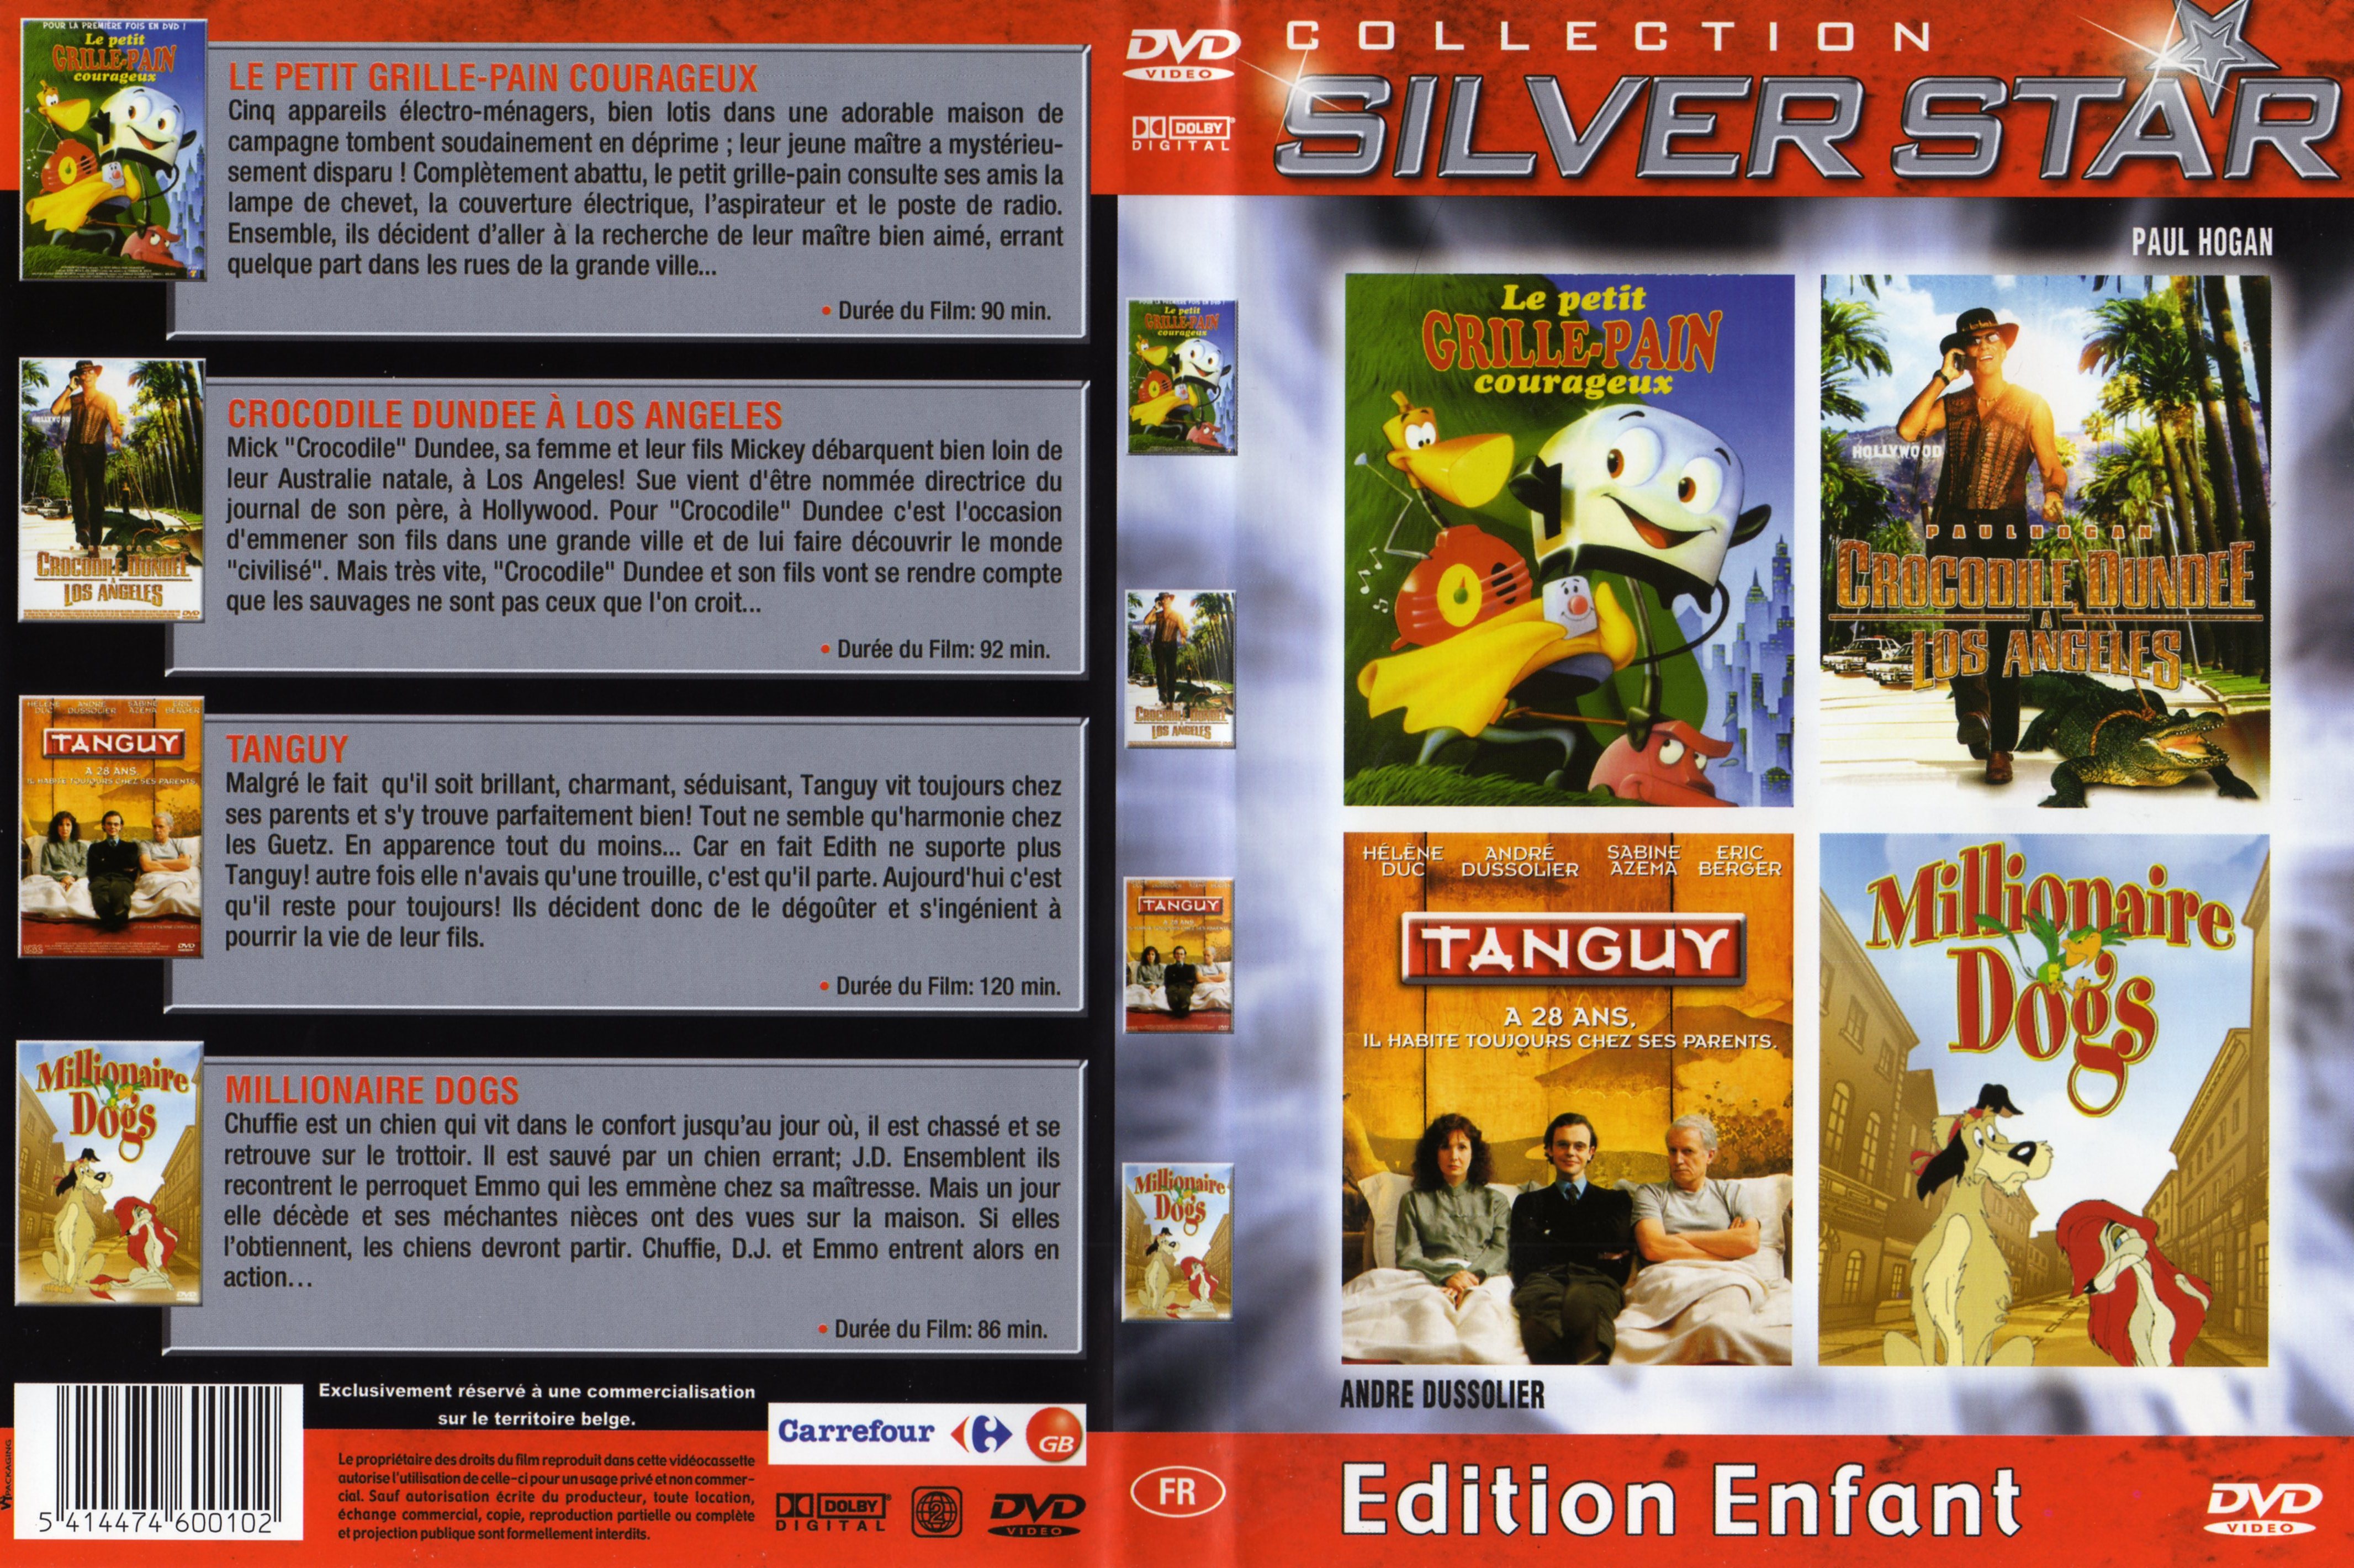 Jaquette DVD Collection silver star Edition enfant